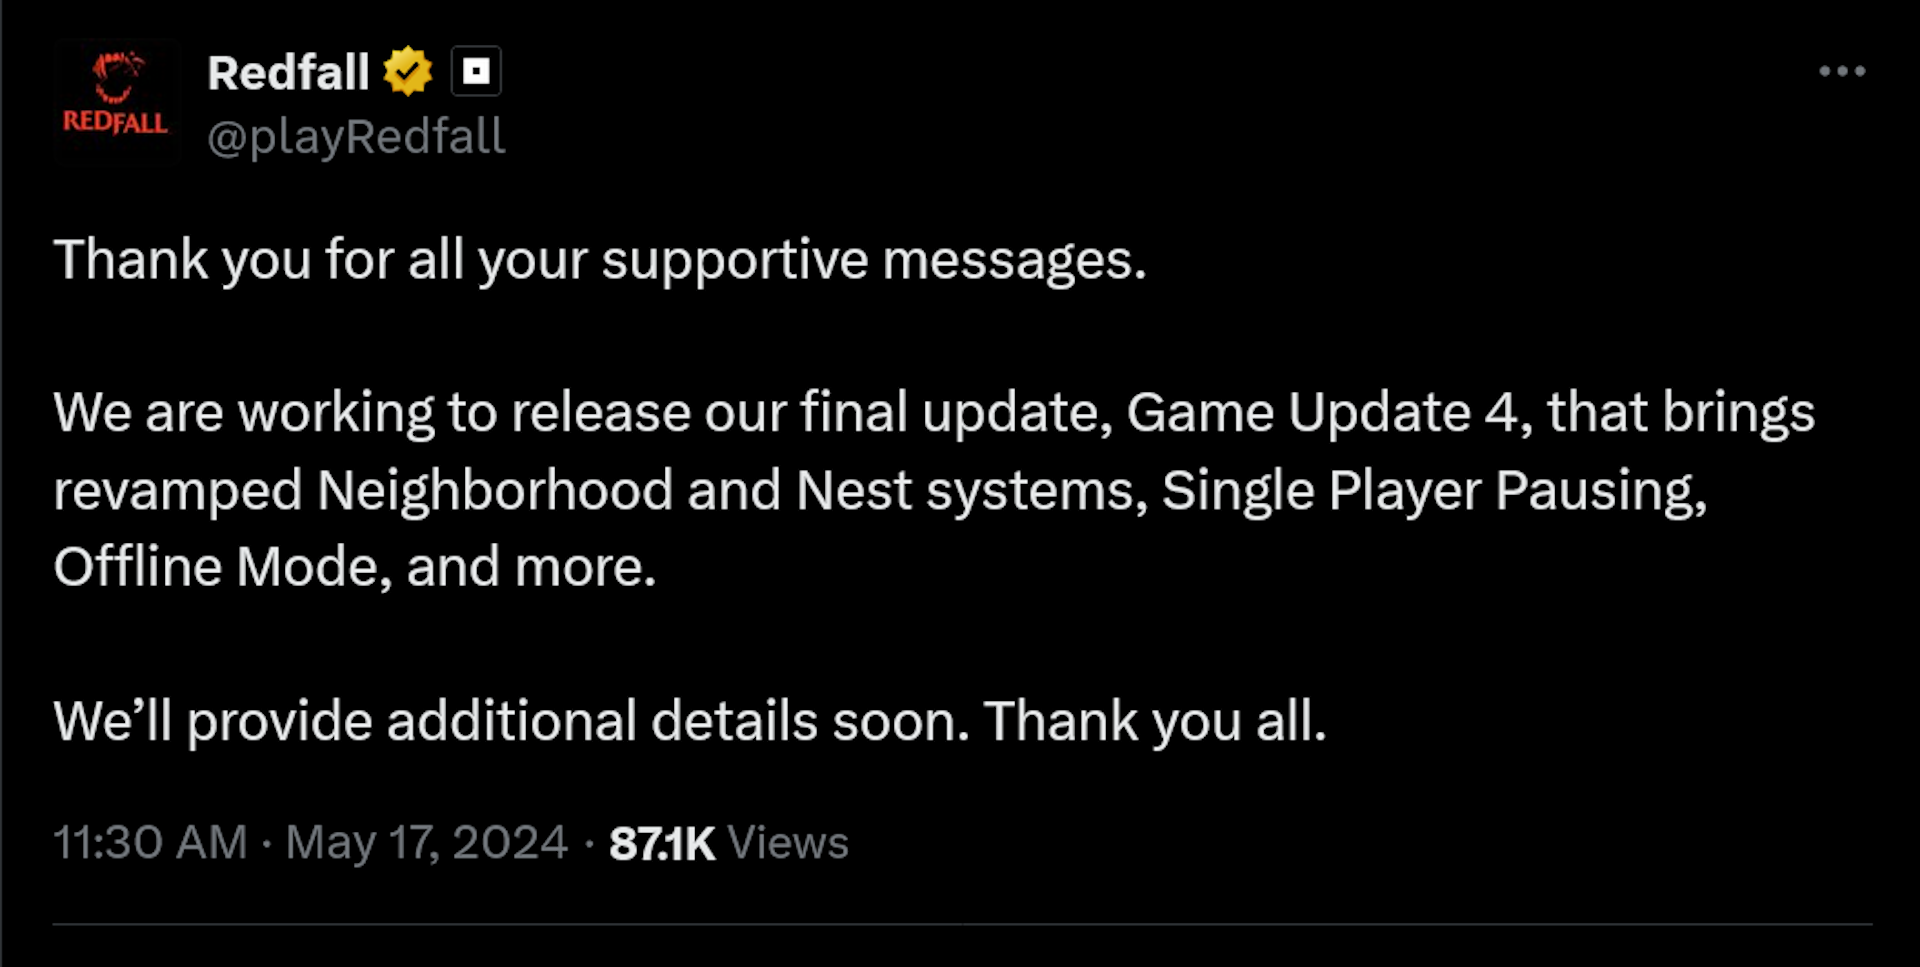 Thank you for all your supportive messages.   We are working to release our final update, Game Update 4, that brings revamped Neighborhood and Nest systems, Single Player Pausing, Offline Mode, and more.   We’ll provide additional details soon. Thank you all.